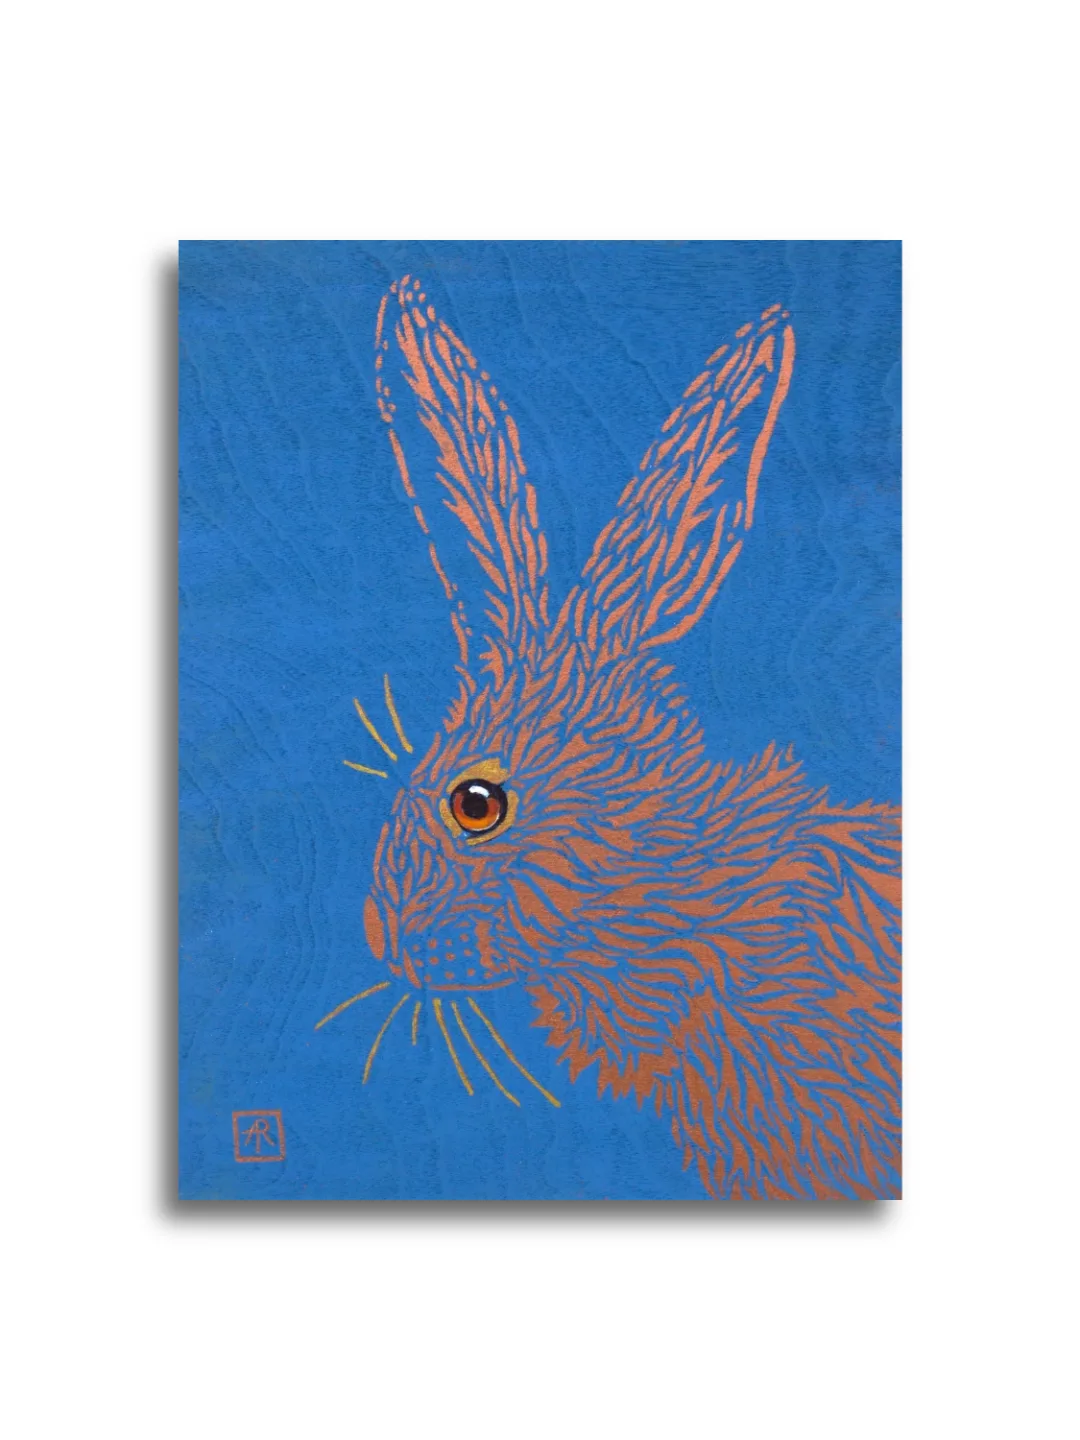 Leveret #2 by Ann Richmond - A stunning, Original stencilled artwork featuring a Leveret. Painted in the artist's unique style... Framing available.